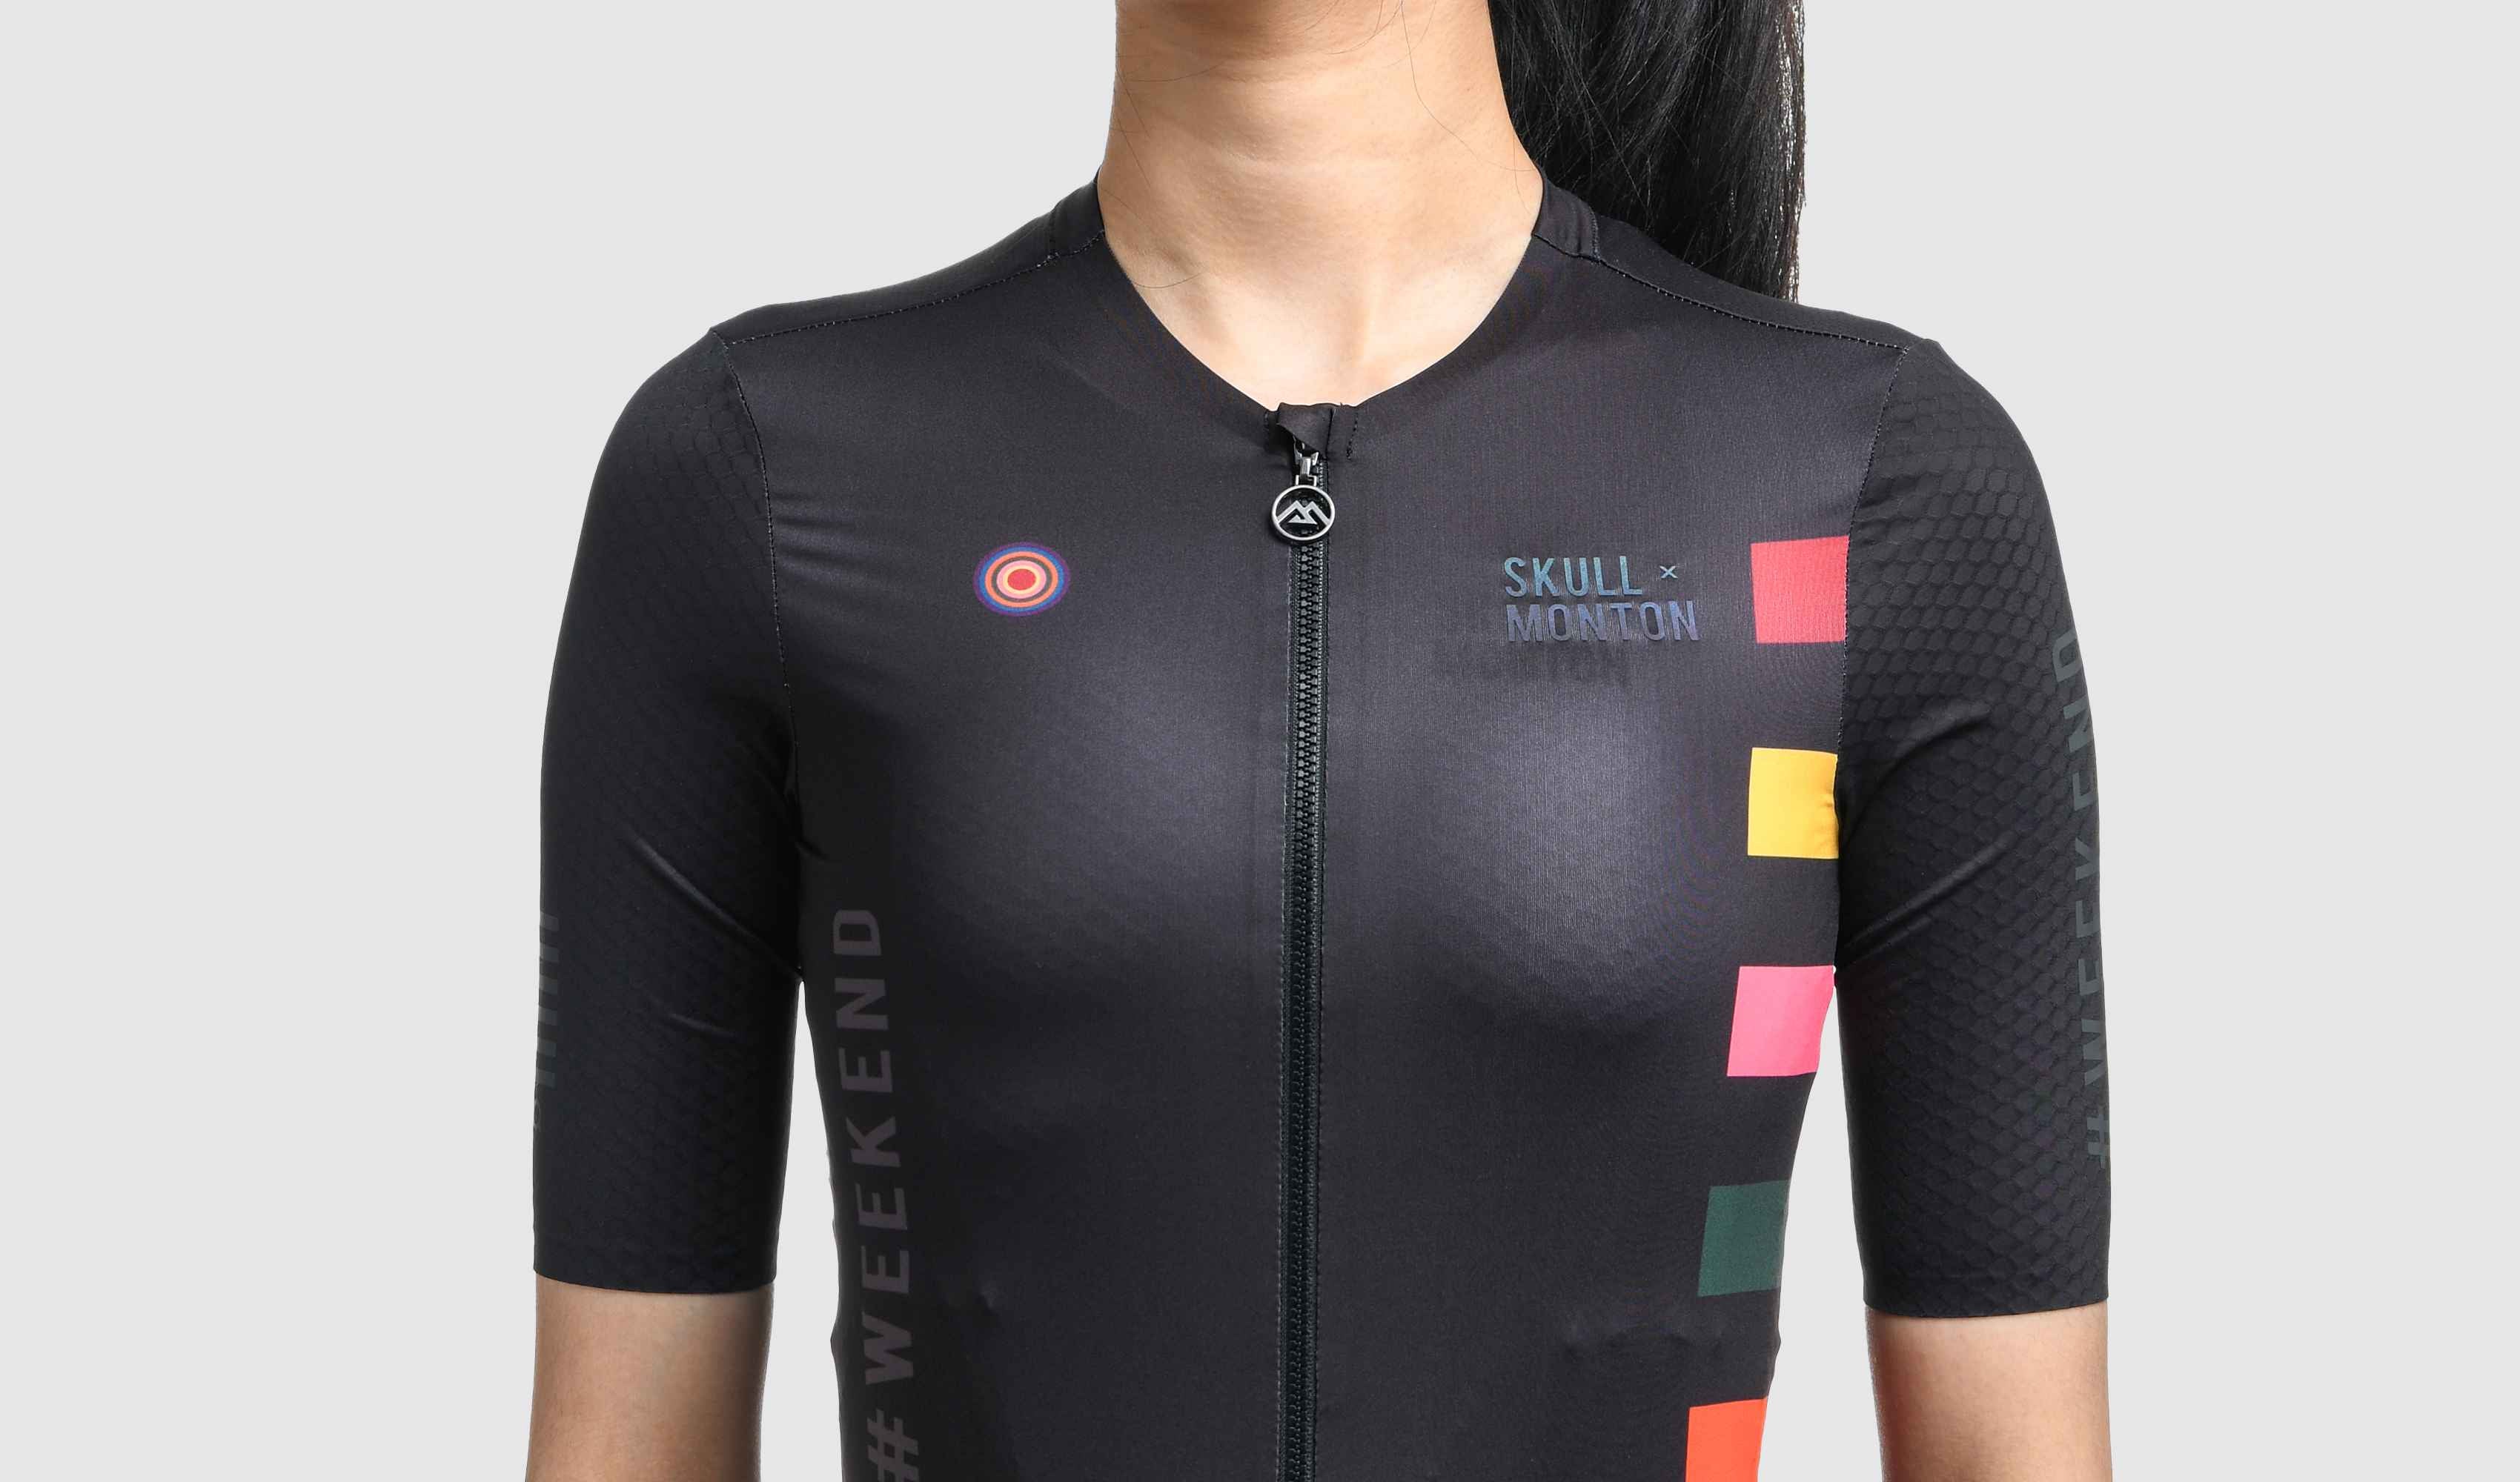 ladies cycling clothes